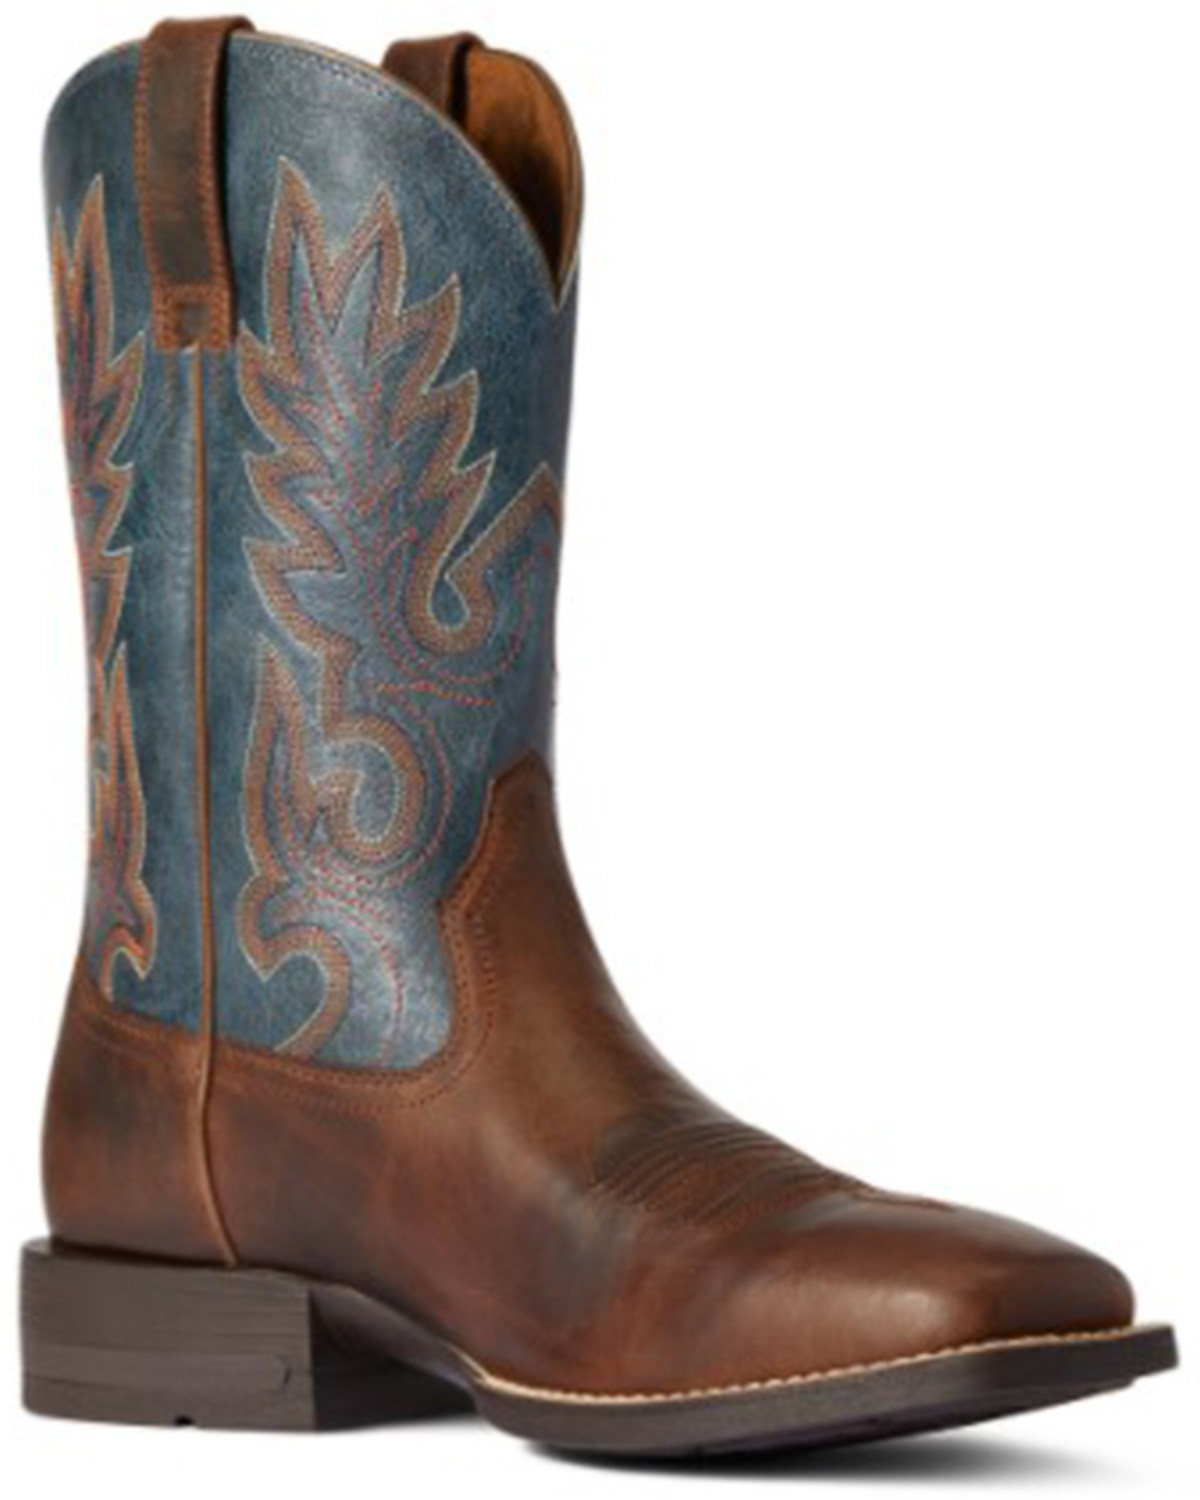 Ariat Men's Layton Western Performance Boots - Broad Square Toe